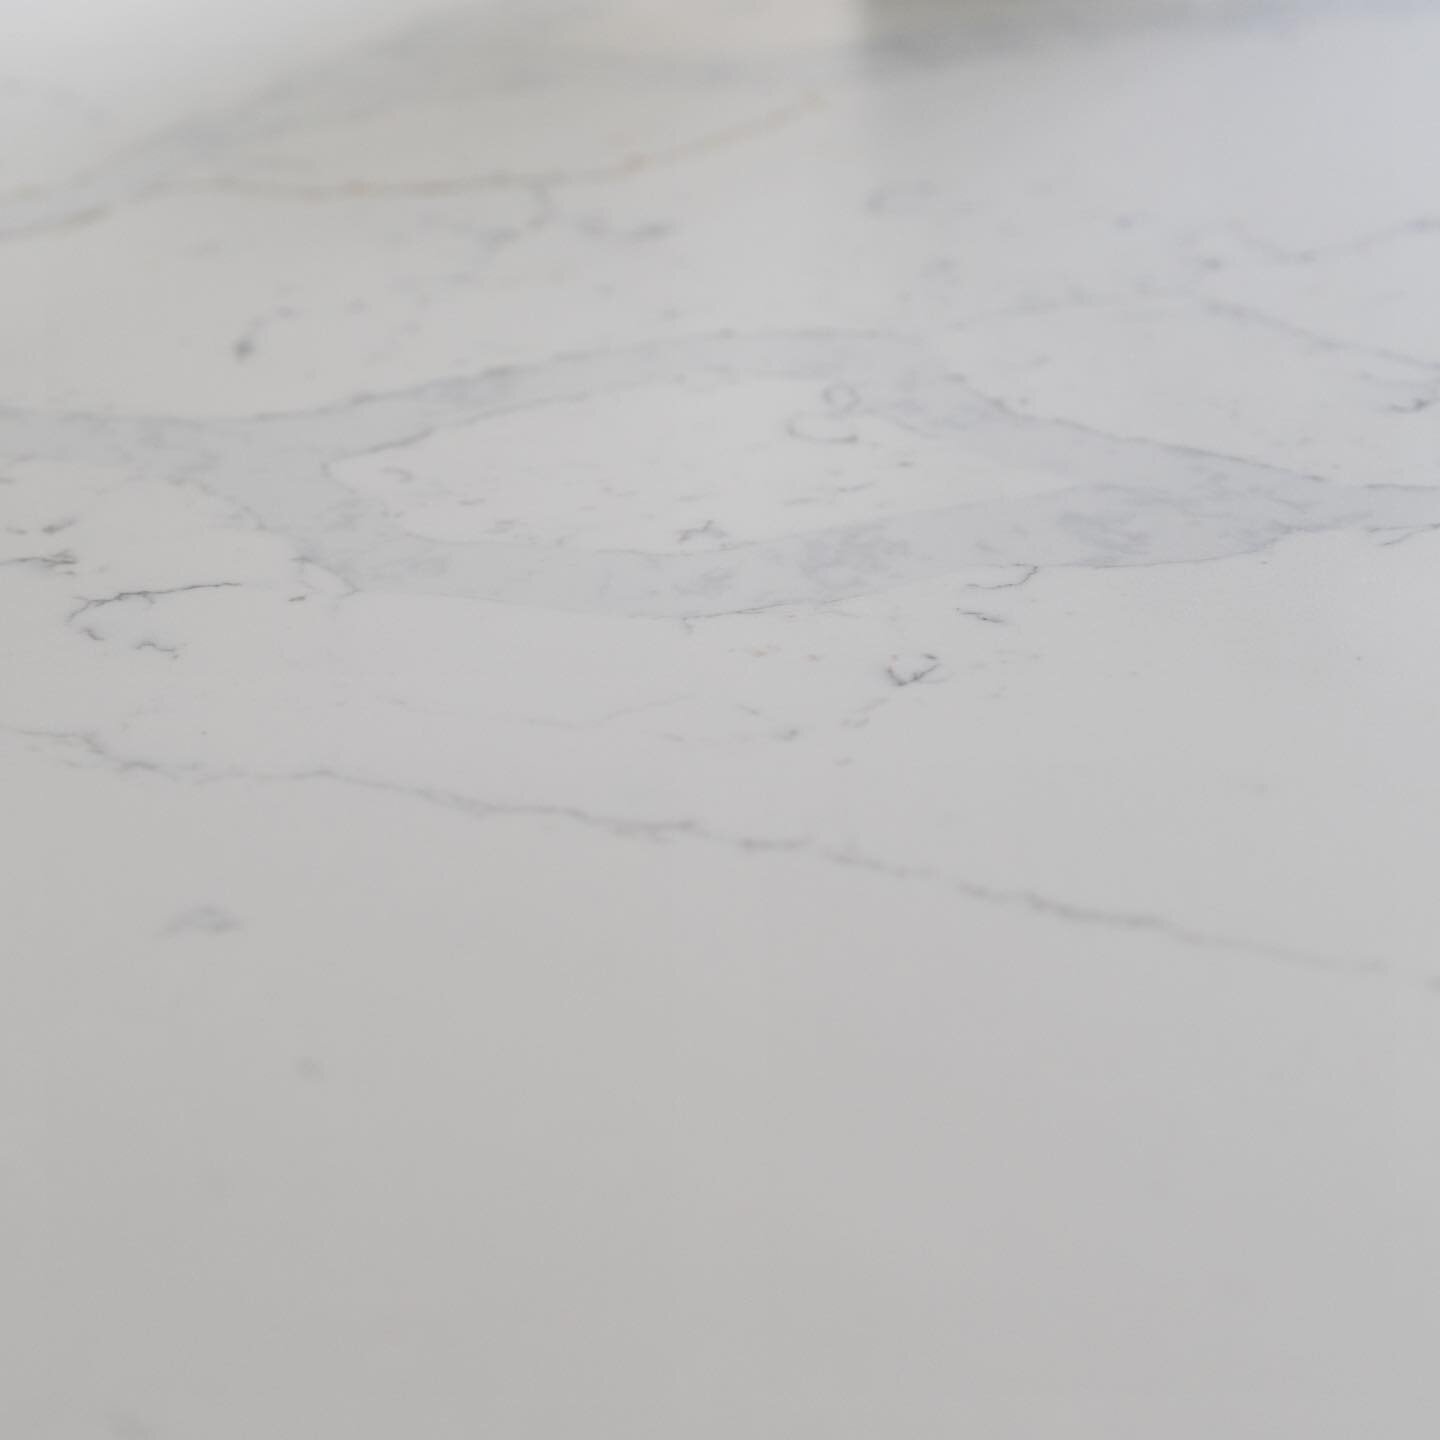 Worktops, quartz or granite. The most durable worktops that add a touch of elegance to any kitchen. Look at this elegantly subtle design #quartz #granite #worktops #kitchenworktop #worktopinspo #quartzinspo #kitchens_of_insta